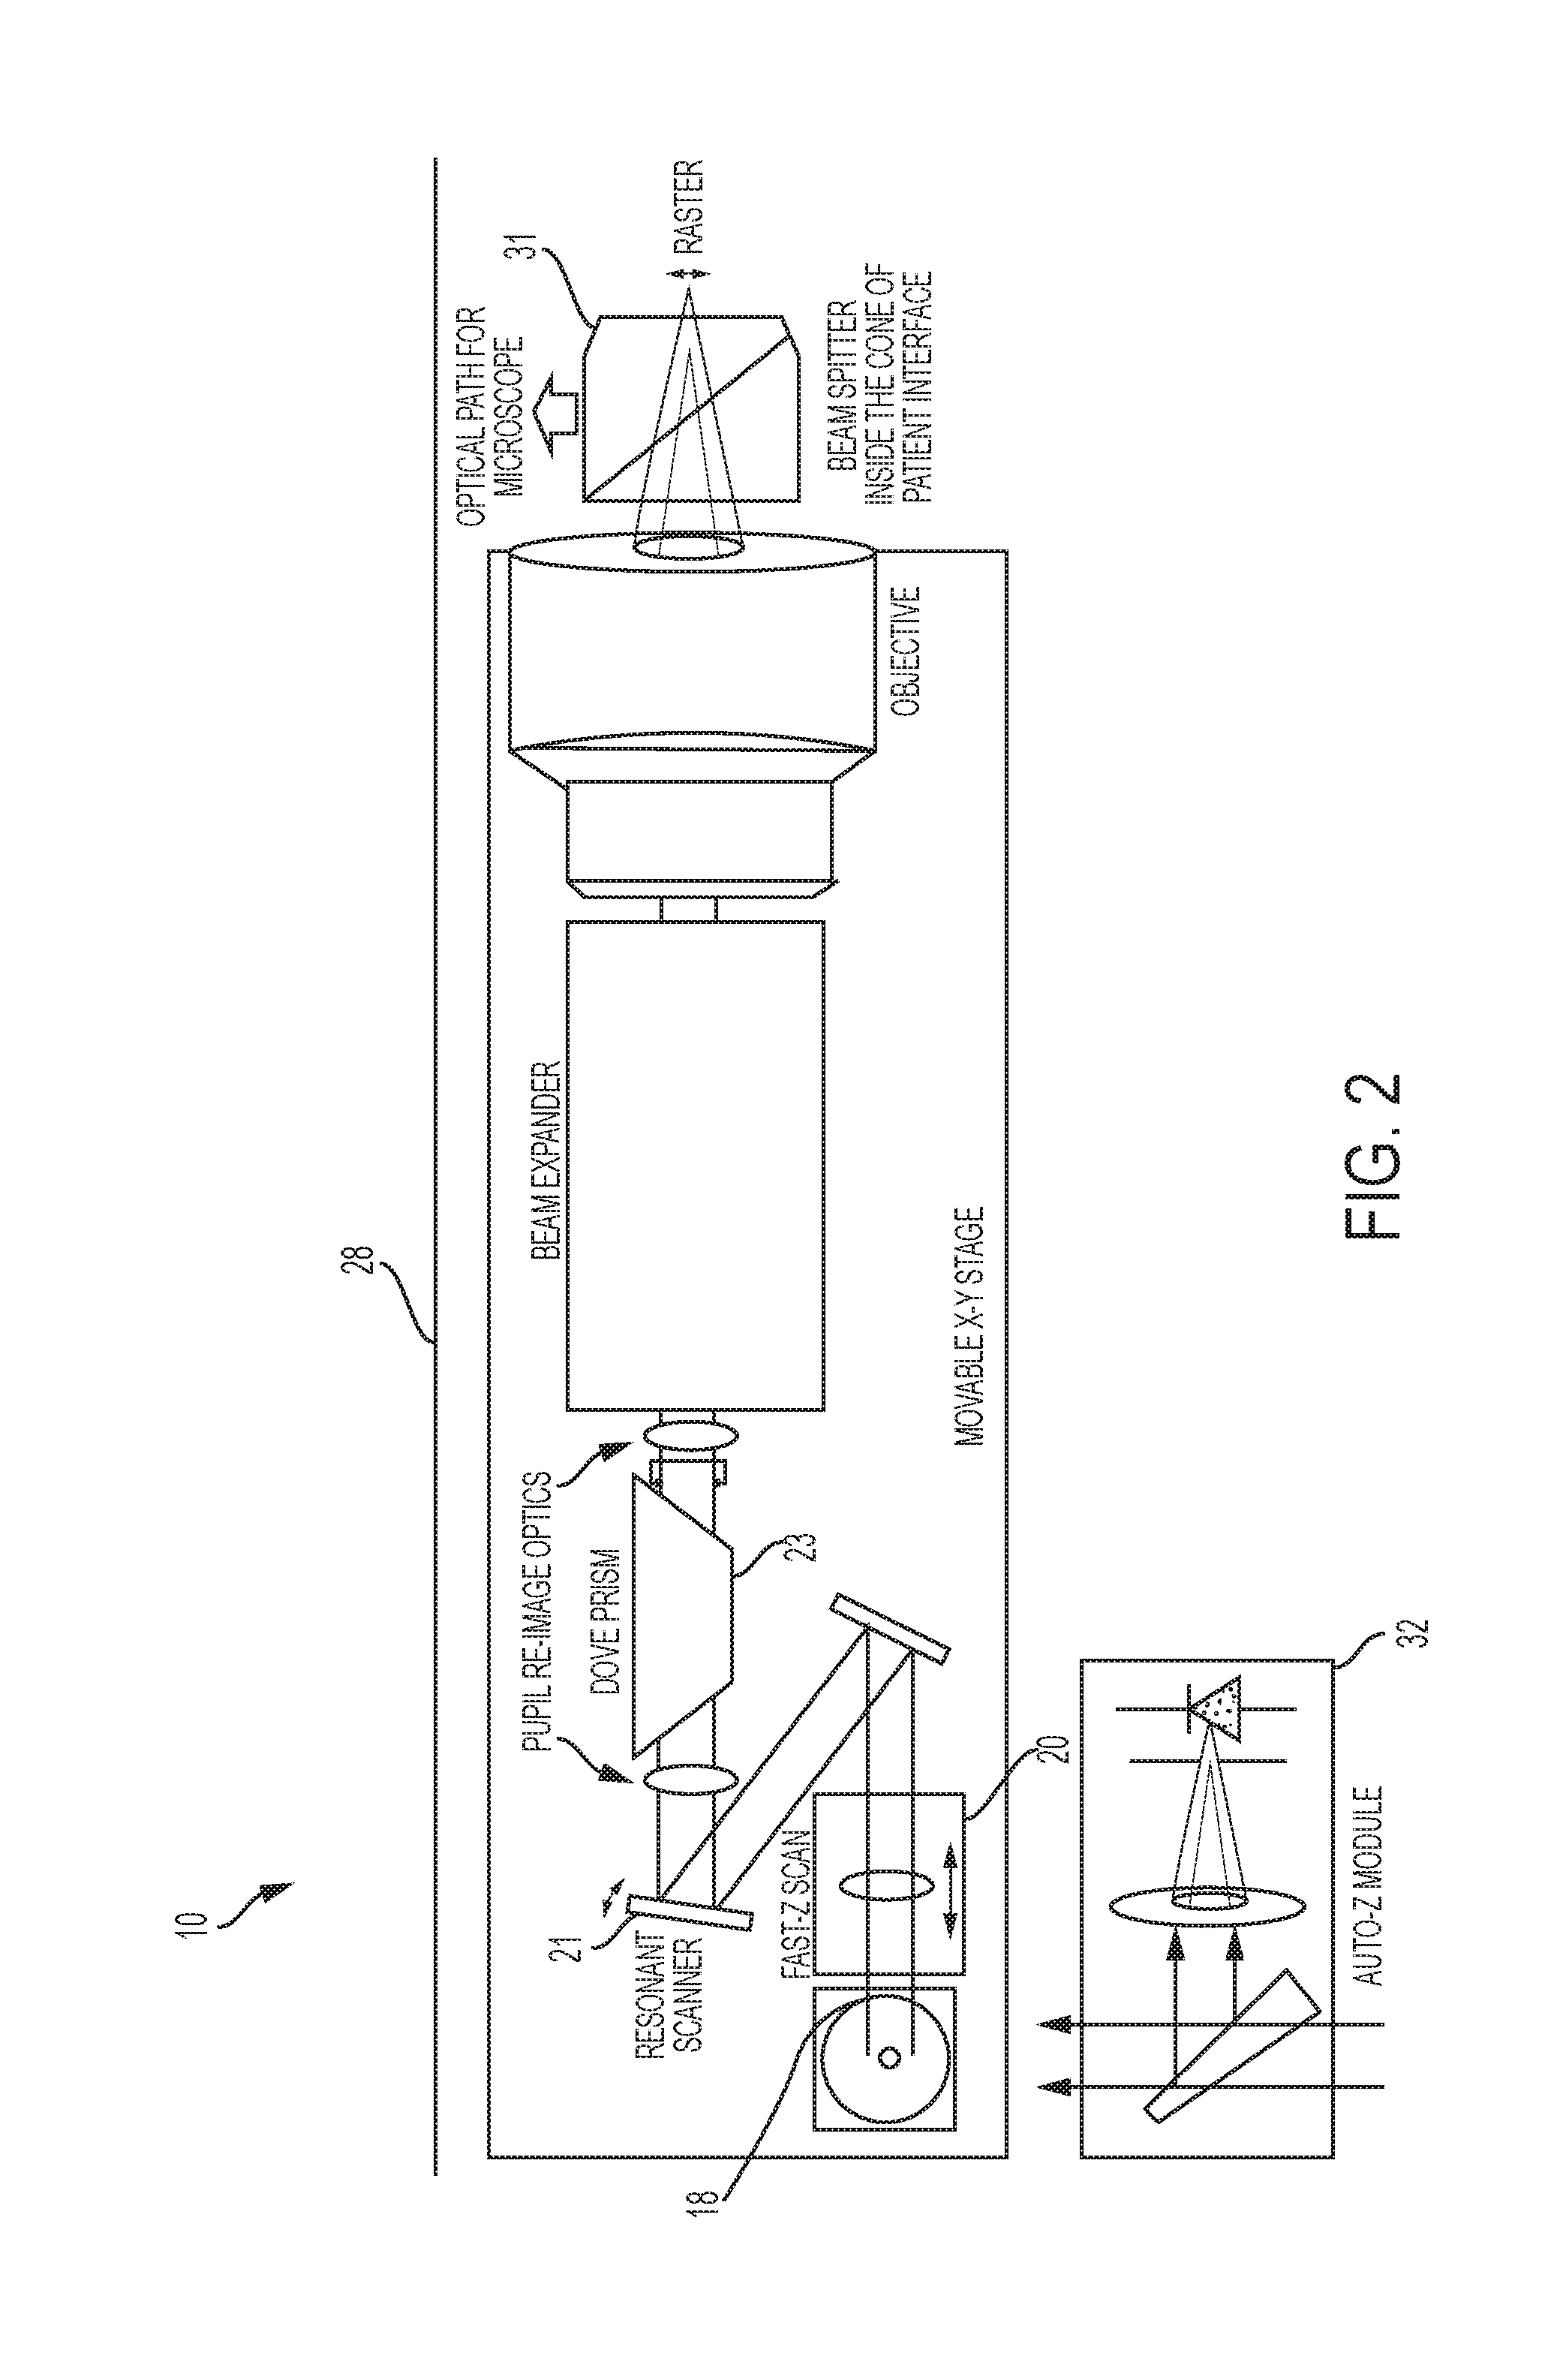 Systems and methods for femtosecond laser photorefractive keratectomy